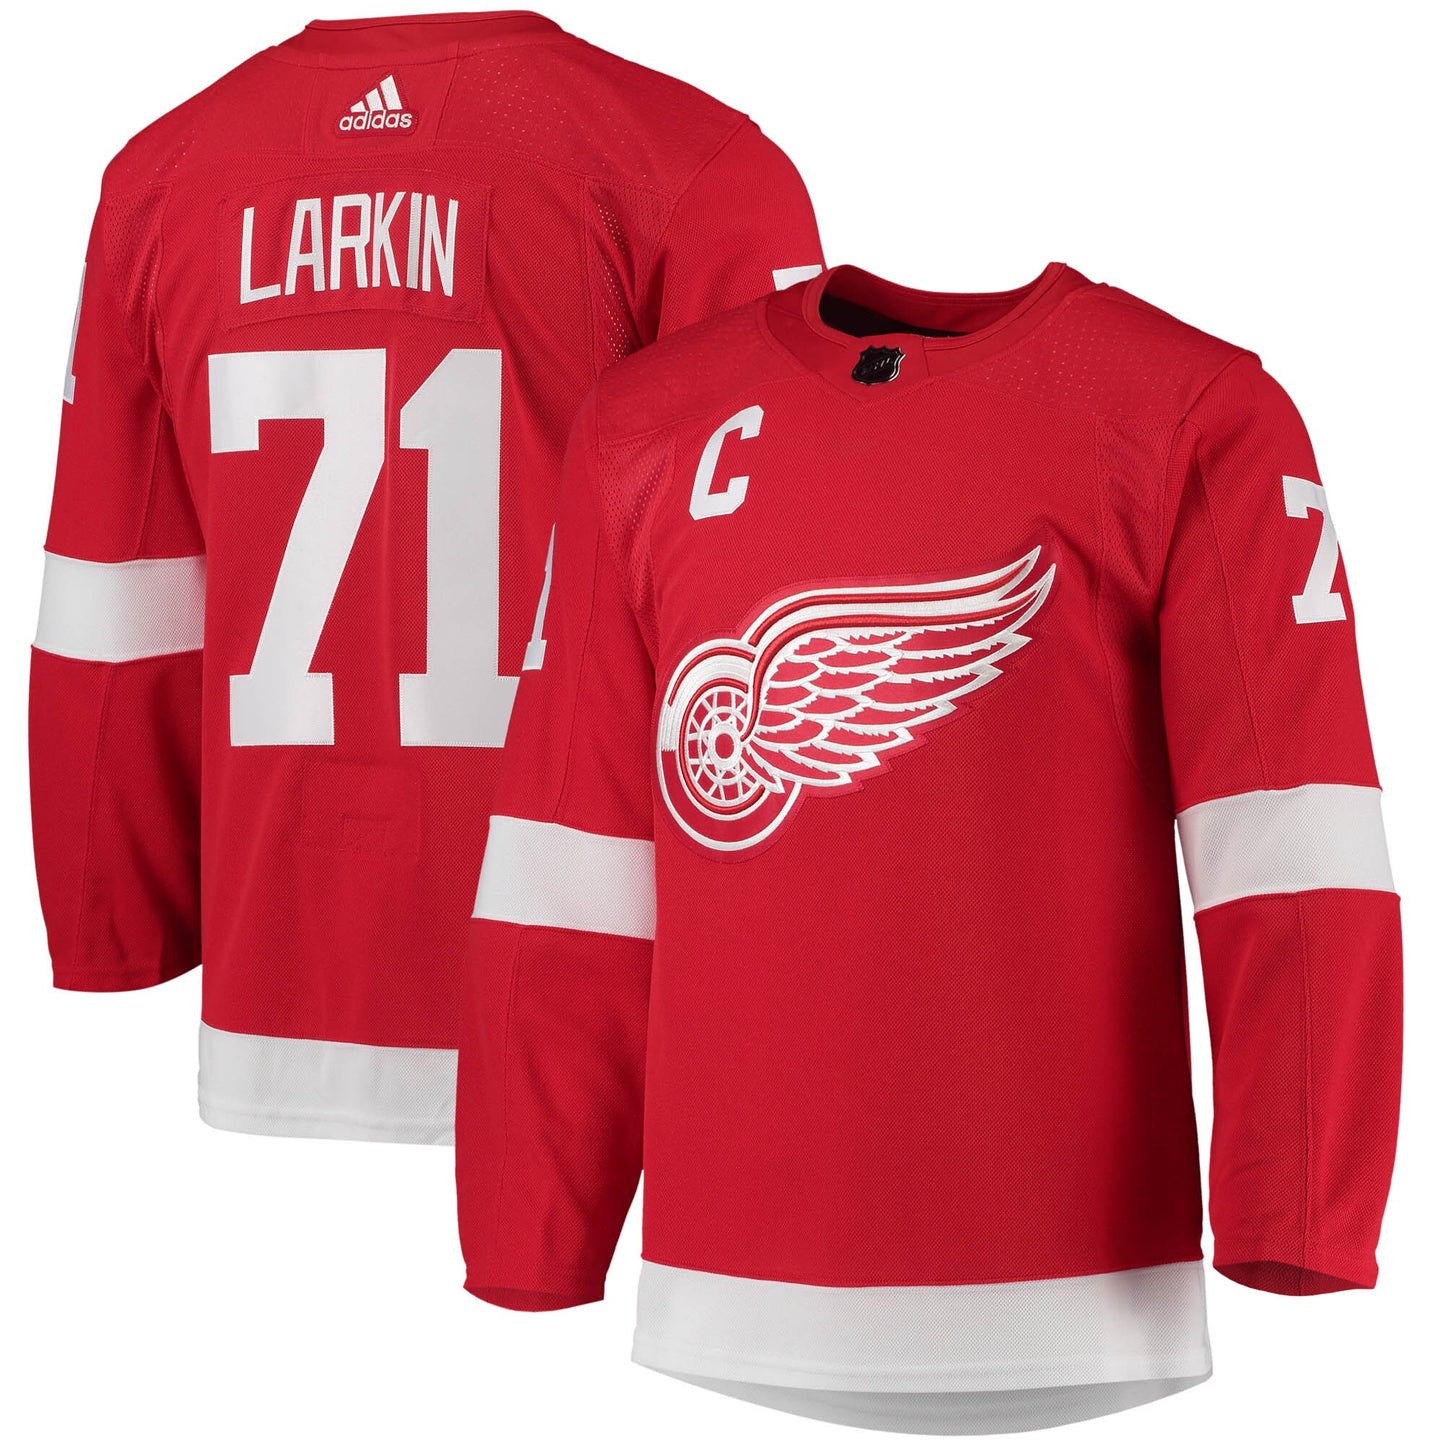 Dylan Larkin Detroit Red Wings adidas Home Primegreen Authentic Pro Player Jersey - Red